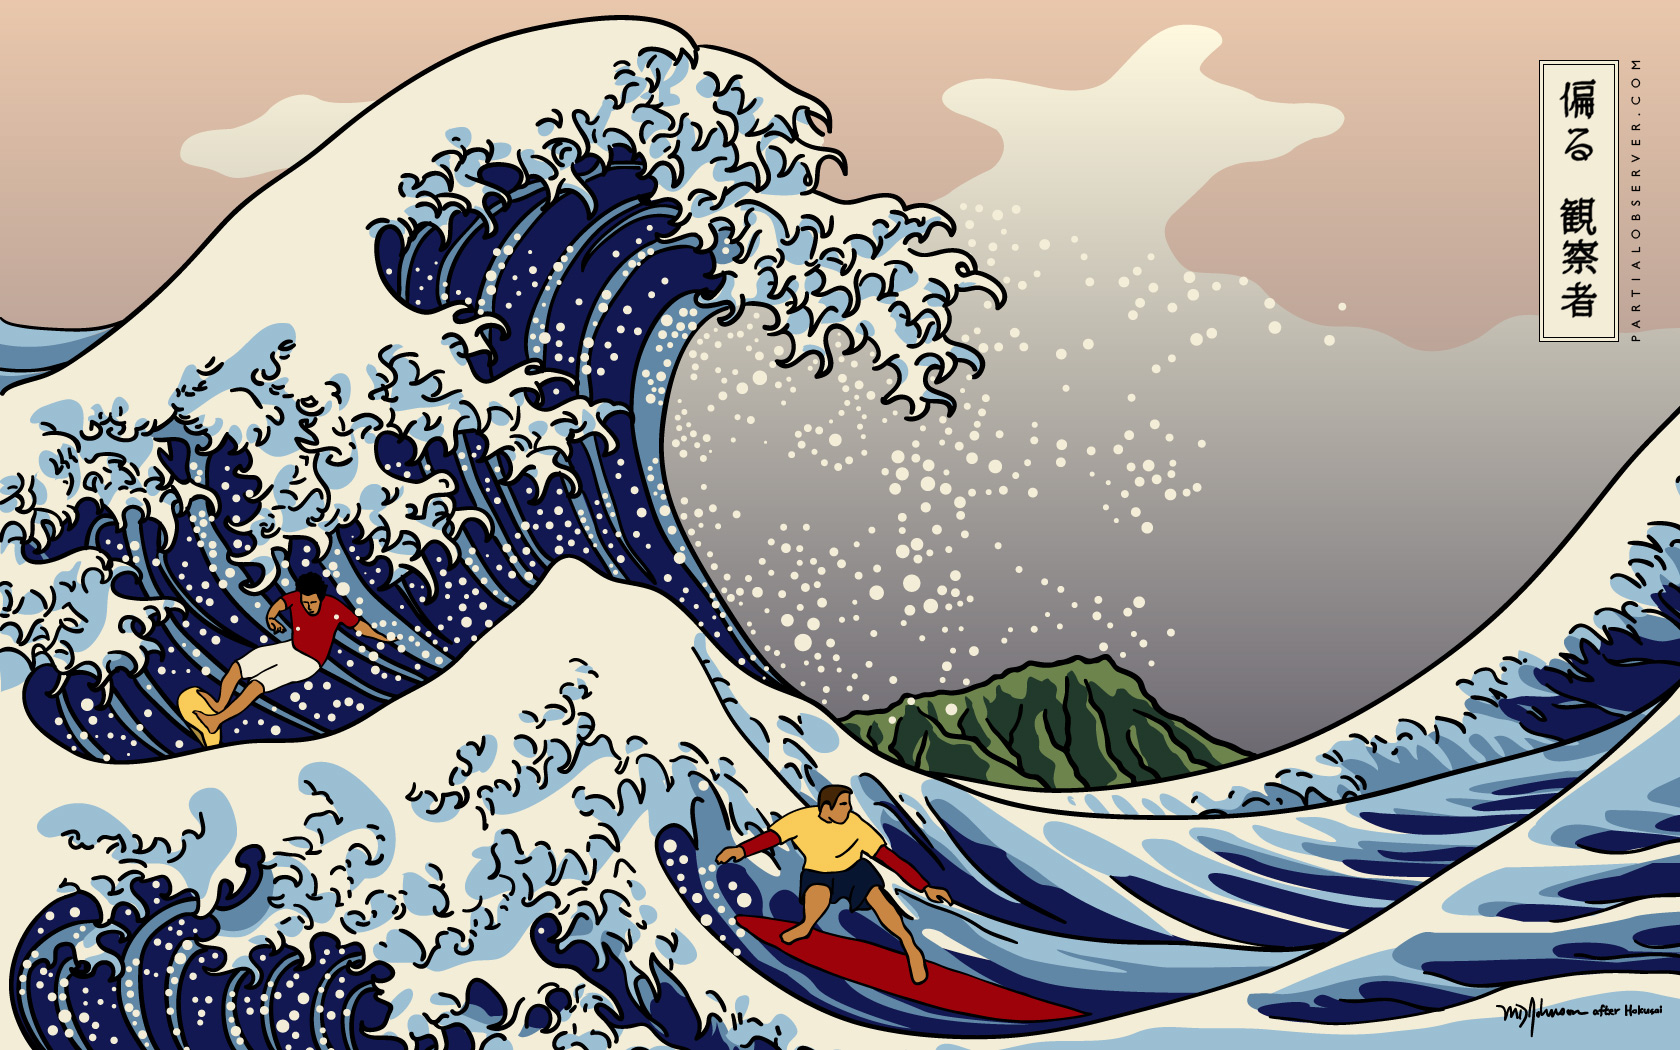 Weekly Wallpaper   Riding the Great Wave